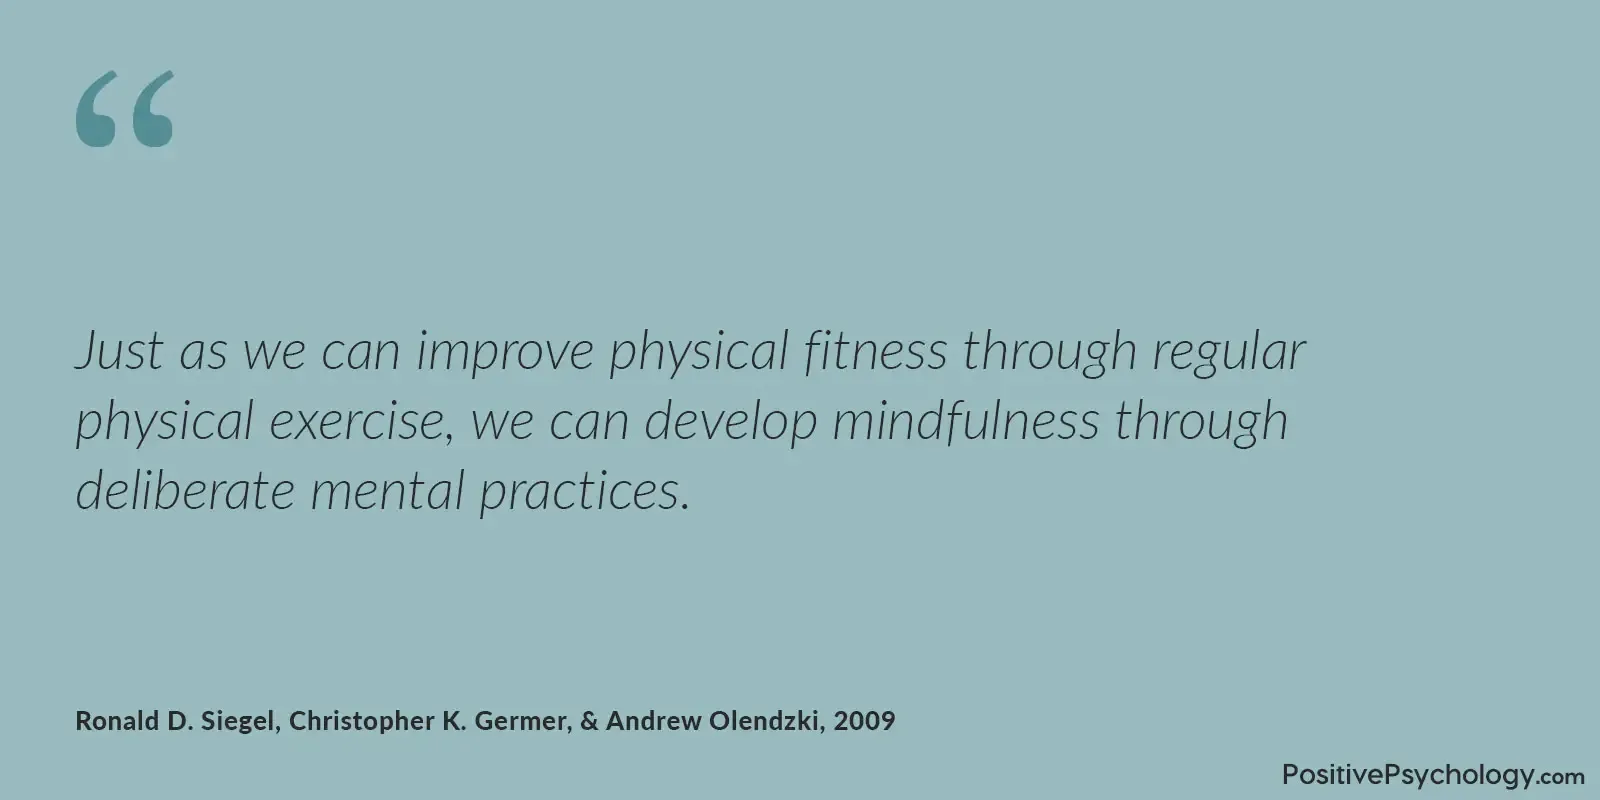 Mindfulness develops through deliberate mental practices